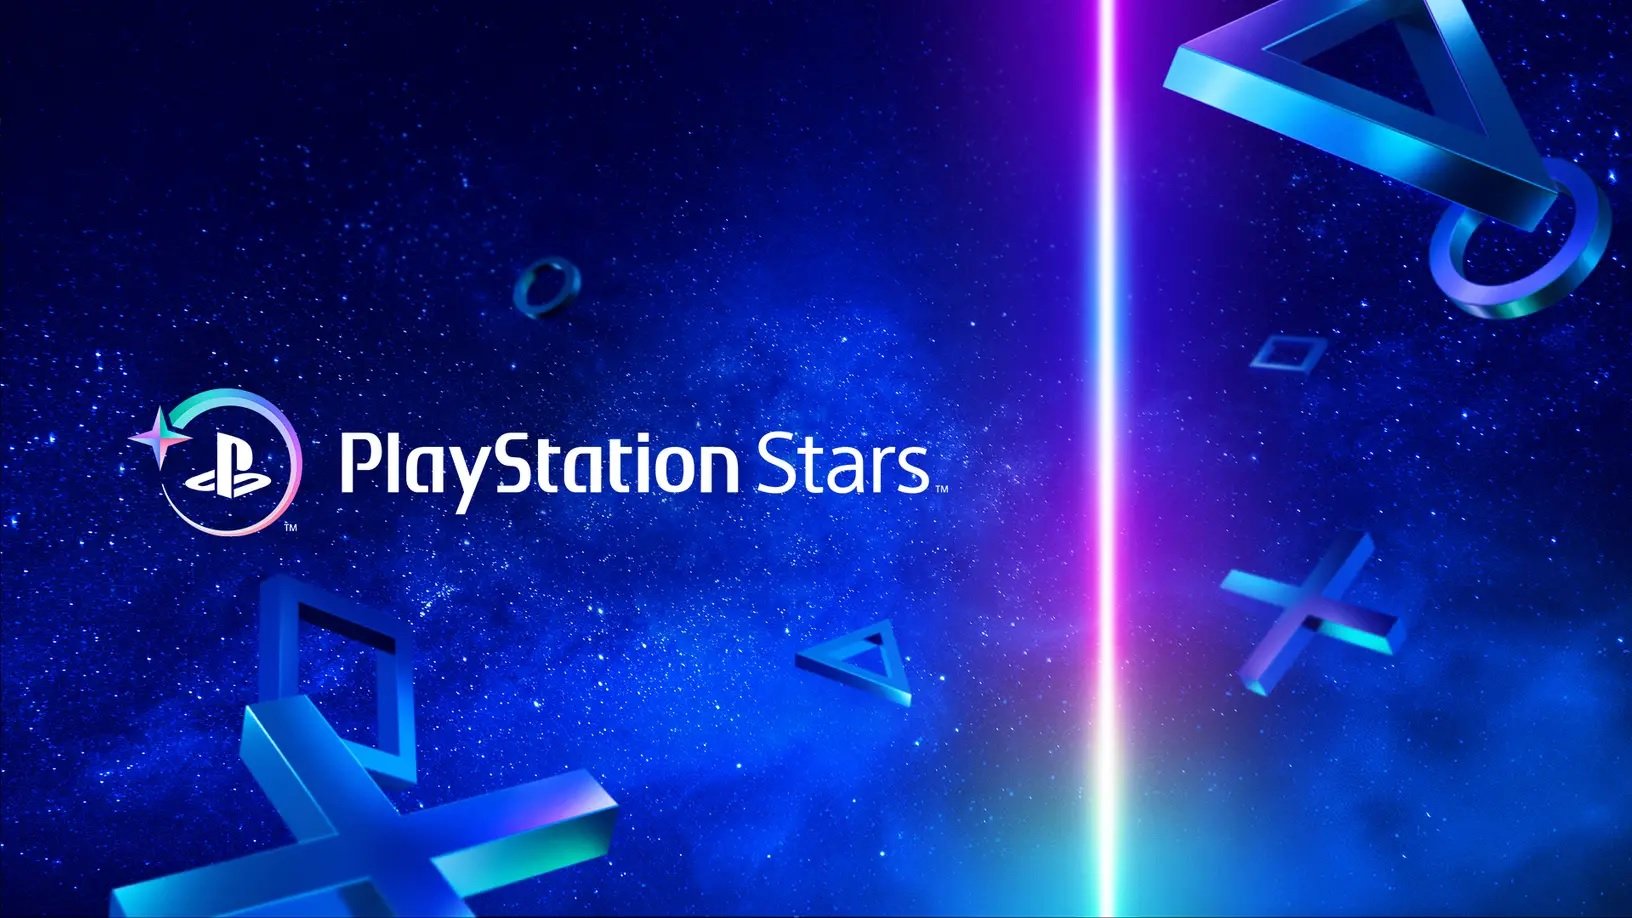 PlayStation State of Play September 2022: News, announcements & trailers -  Polygon